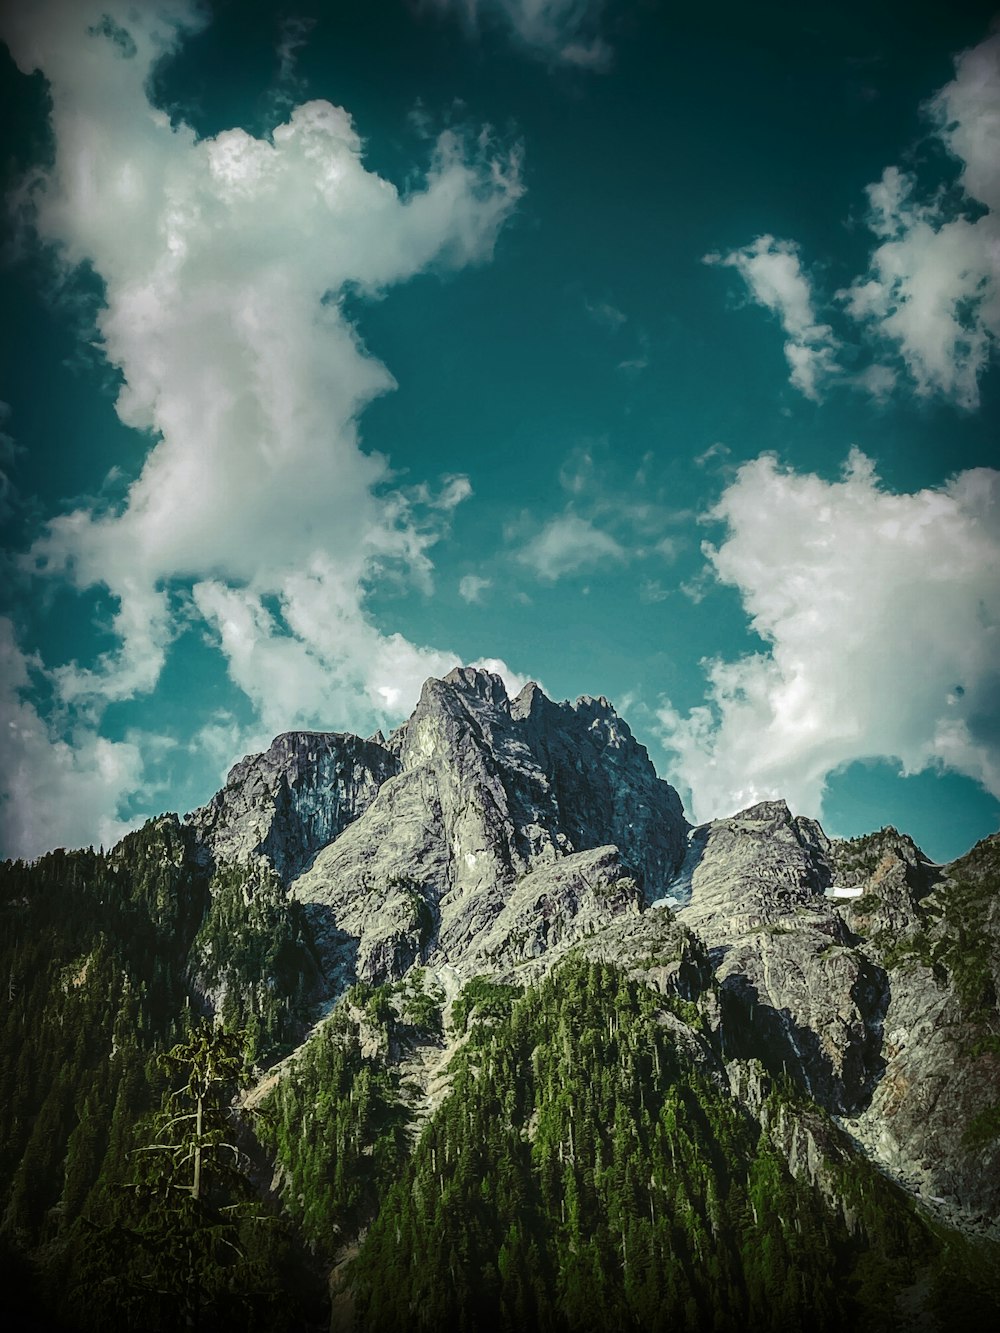 a mountain range with trees and clouds in the background